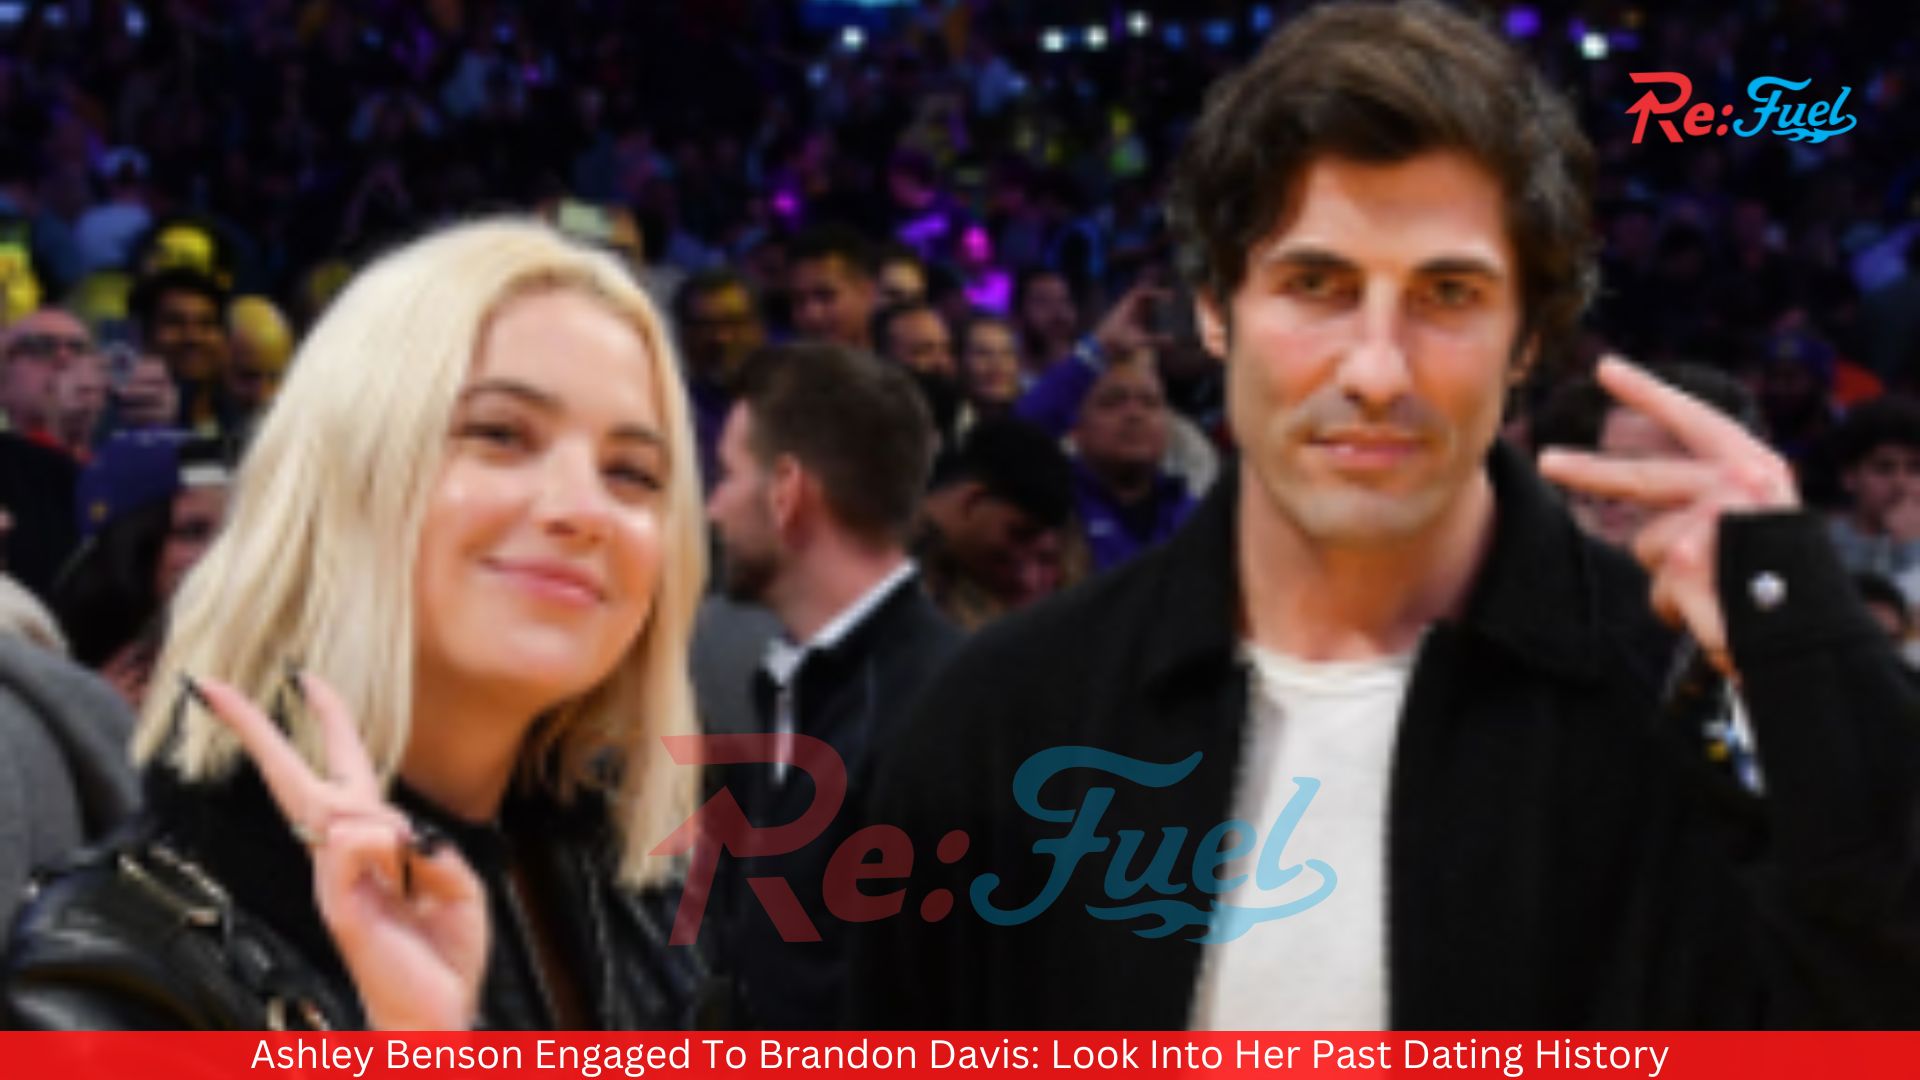 Ashley Benson Engaged To Brandon Davis: Look Into Her Past Dating History